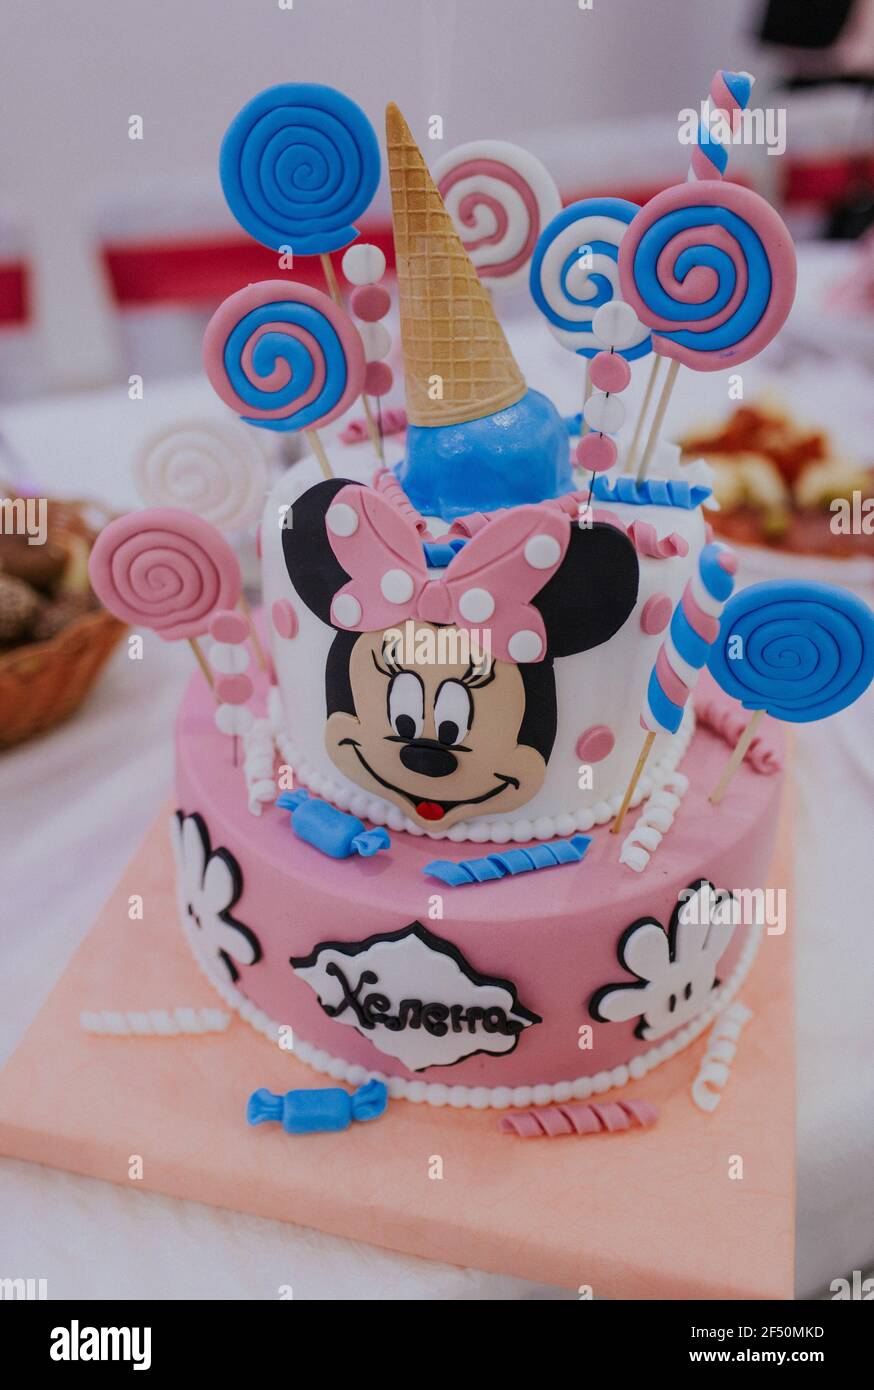 Minnie Mouse Cakes  Minnie Mouse Cakes For Boys and Girls